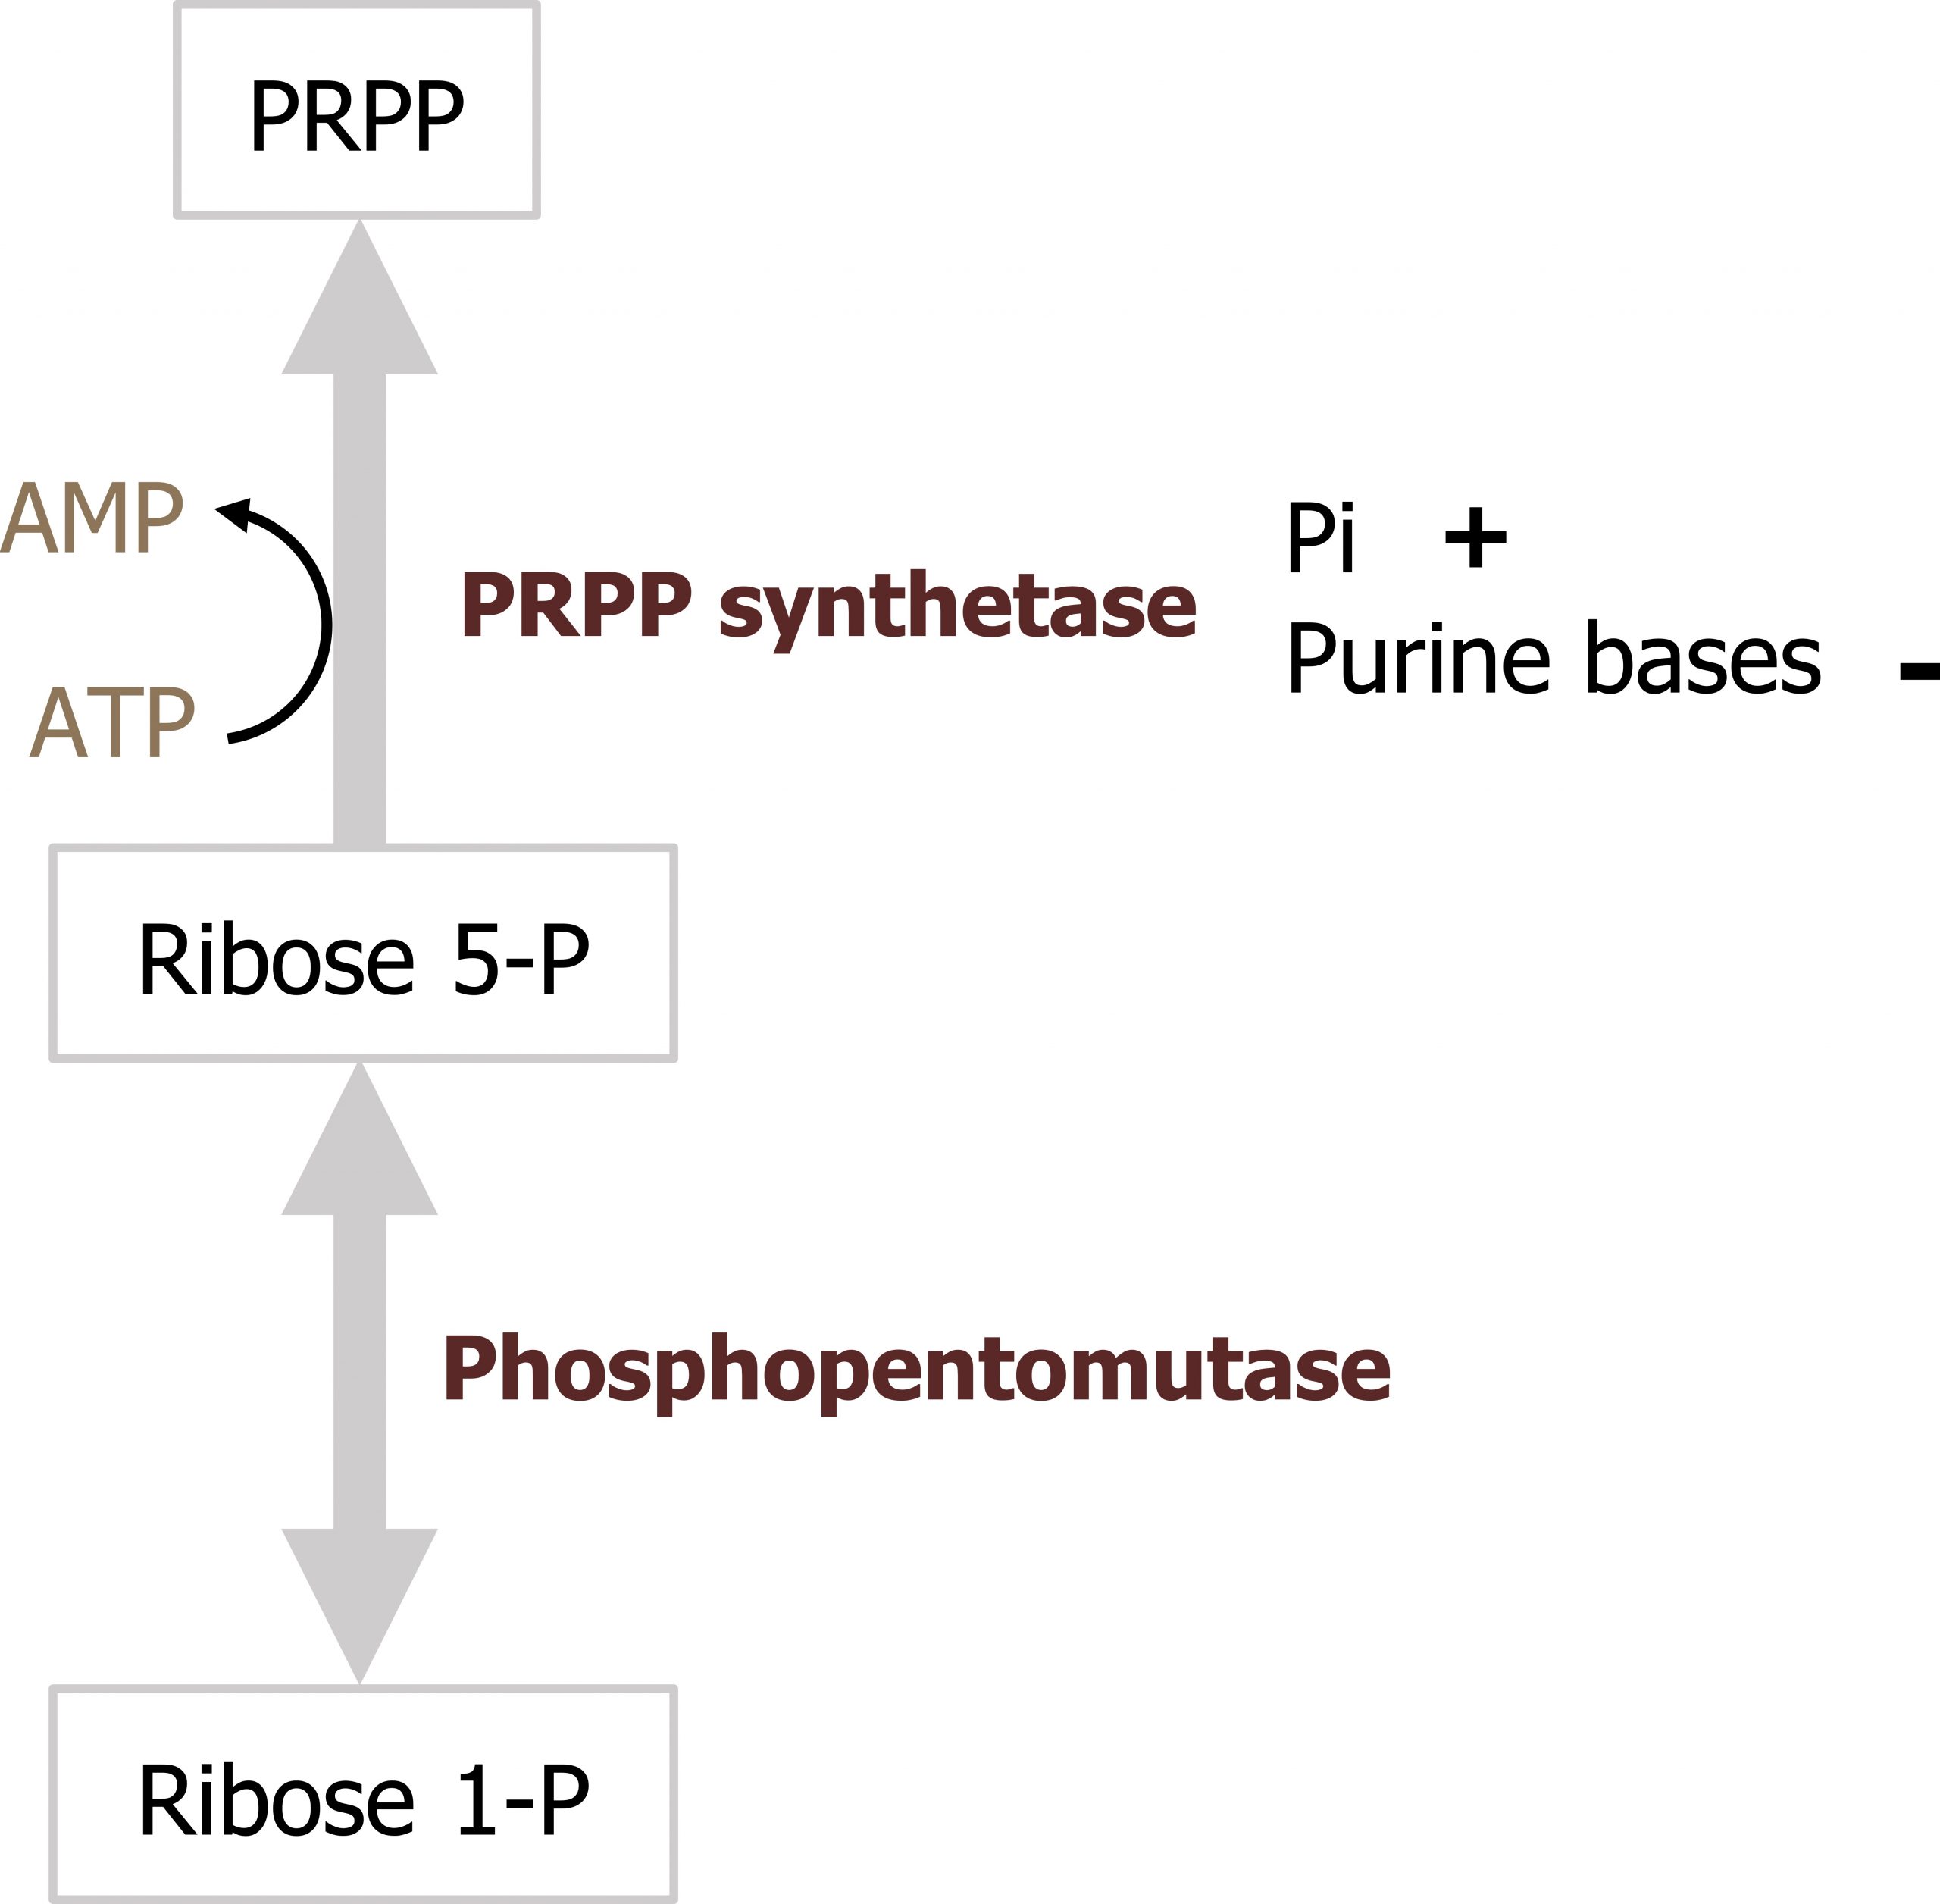 Ribose 1-P bidirectional arrow with enzyme phosphopentomutase to ribose 5-P arrow with ATP arrow AMP and enzyme PRPP synthetase to PRPP. Pi excites and purine bases inhibits PRPP synthetase